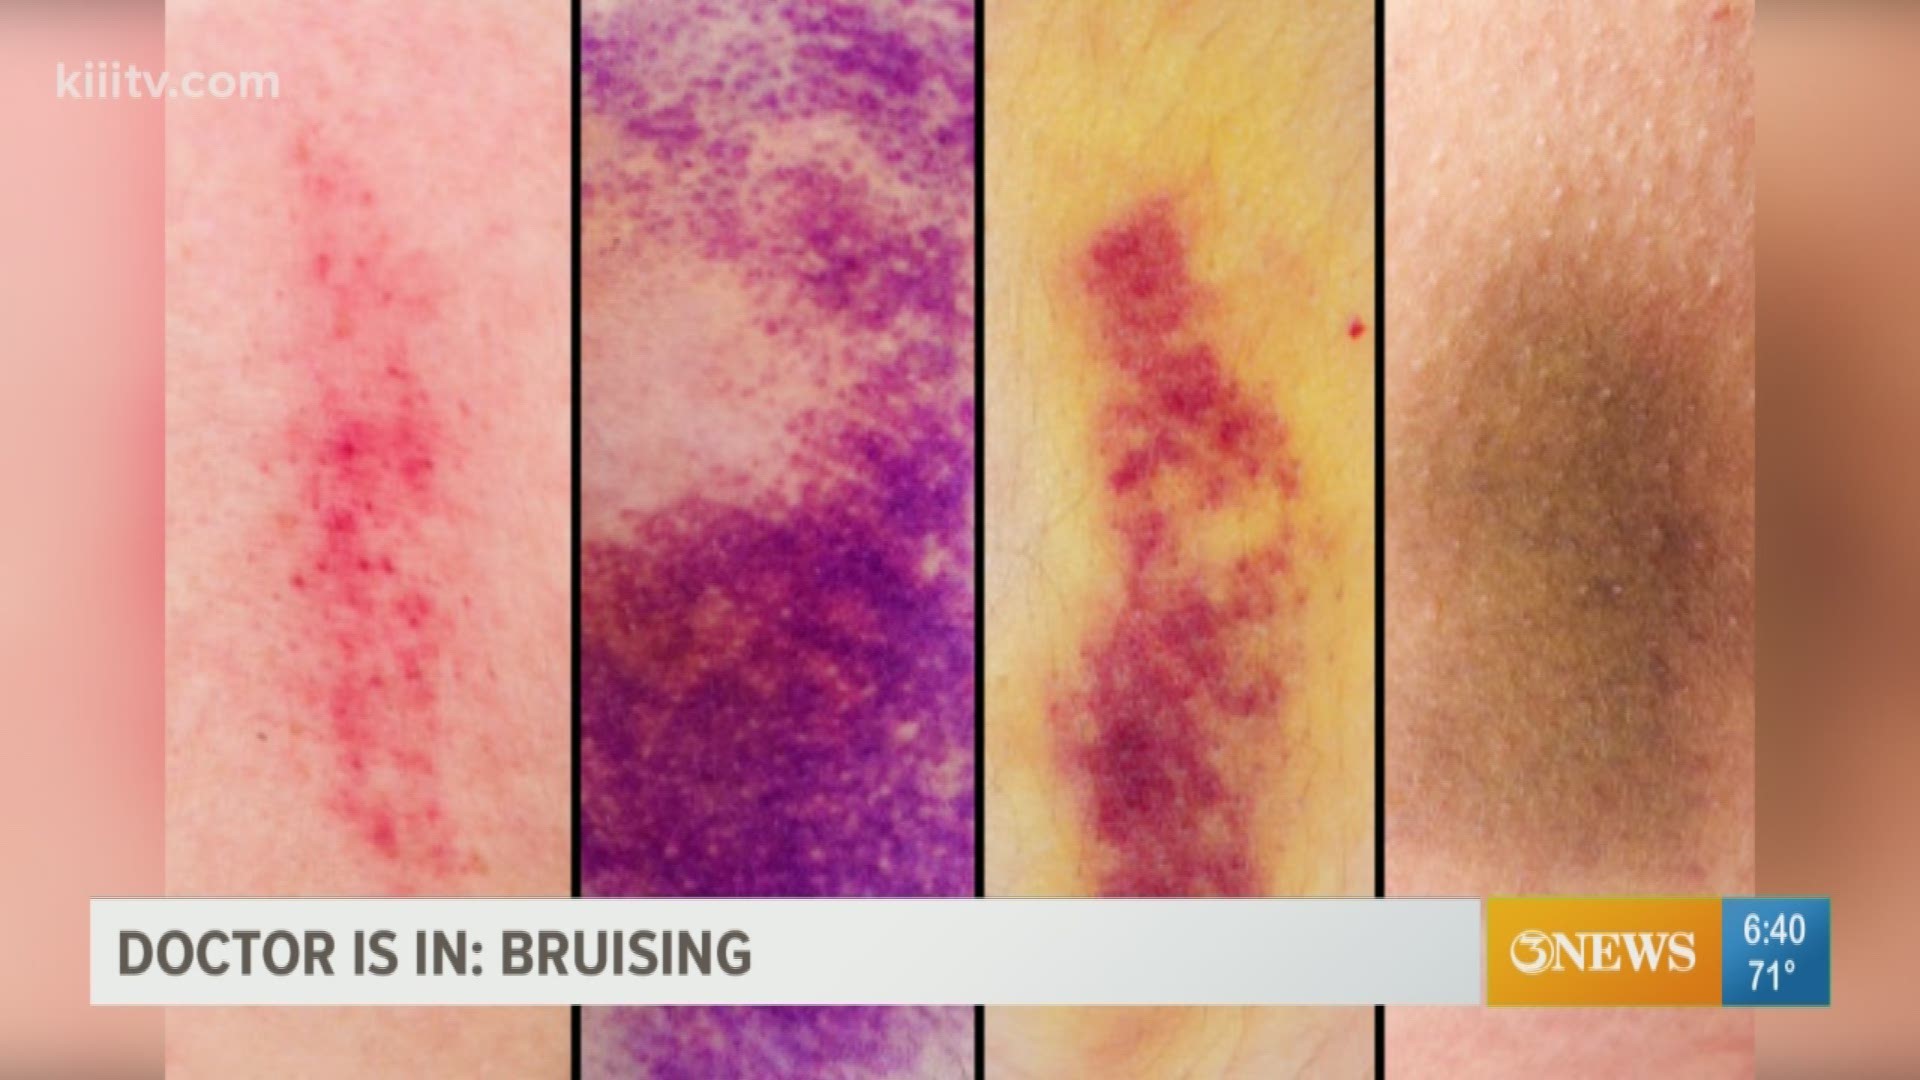 Dr. Gregg Silverman explained the various types of bruises, what they can indicate, and how to treat them.